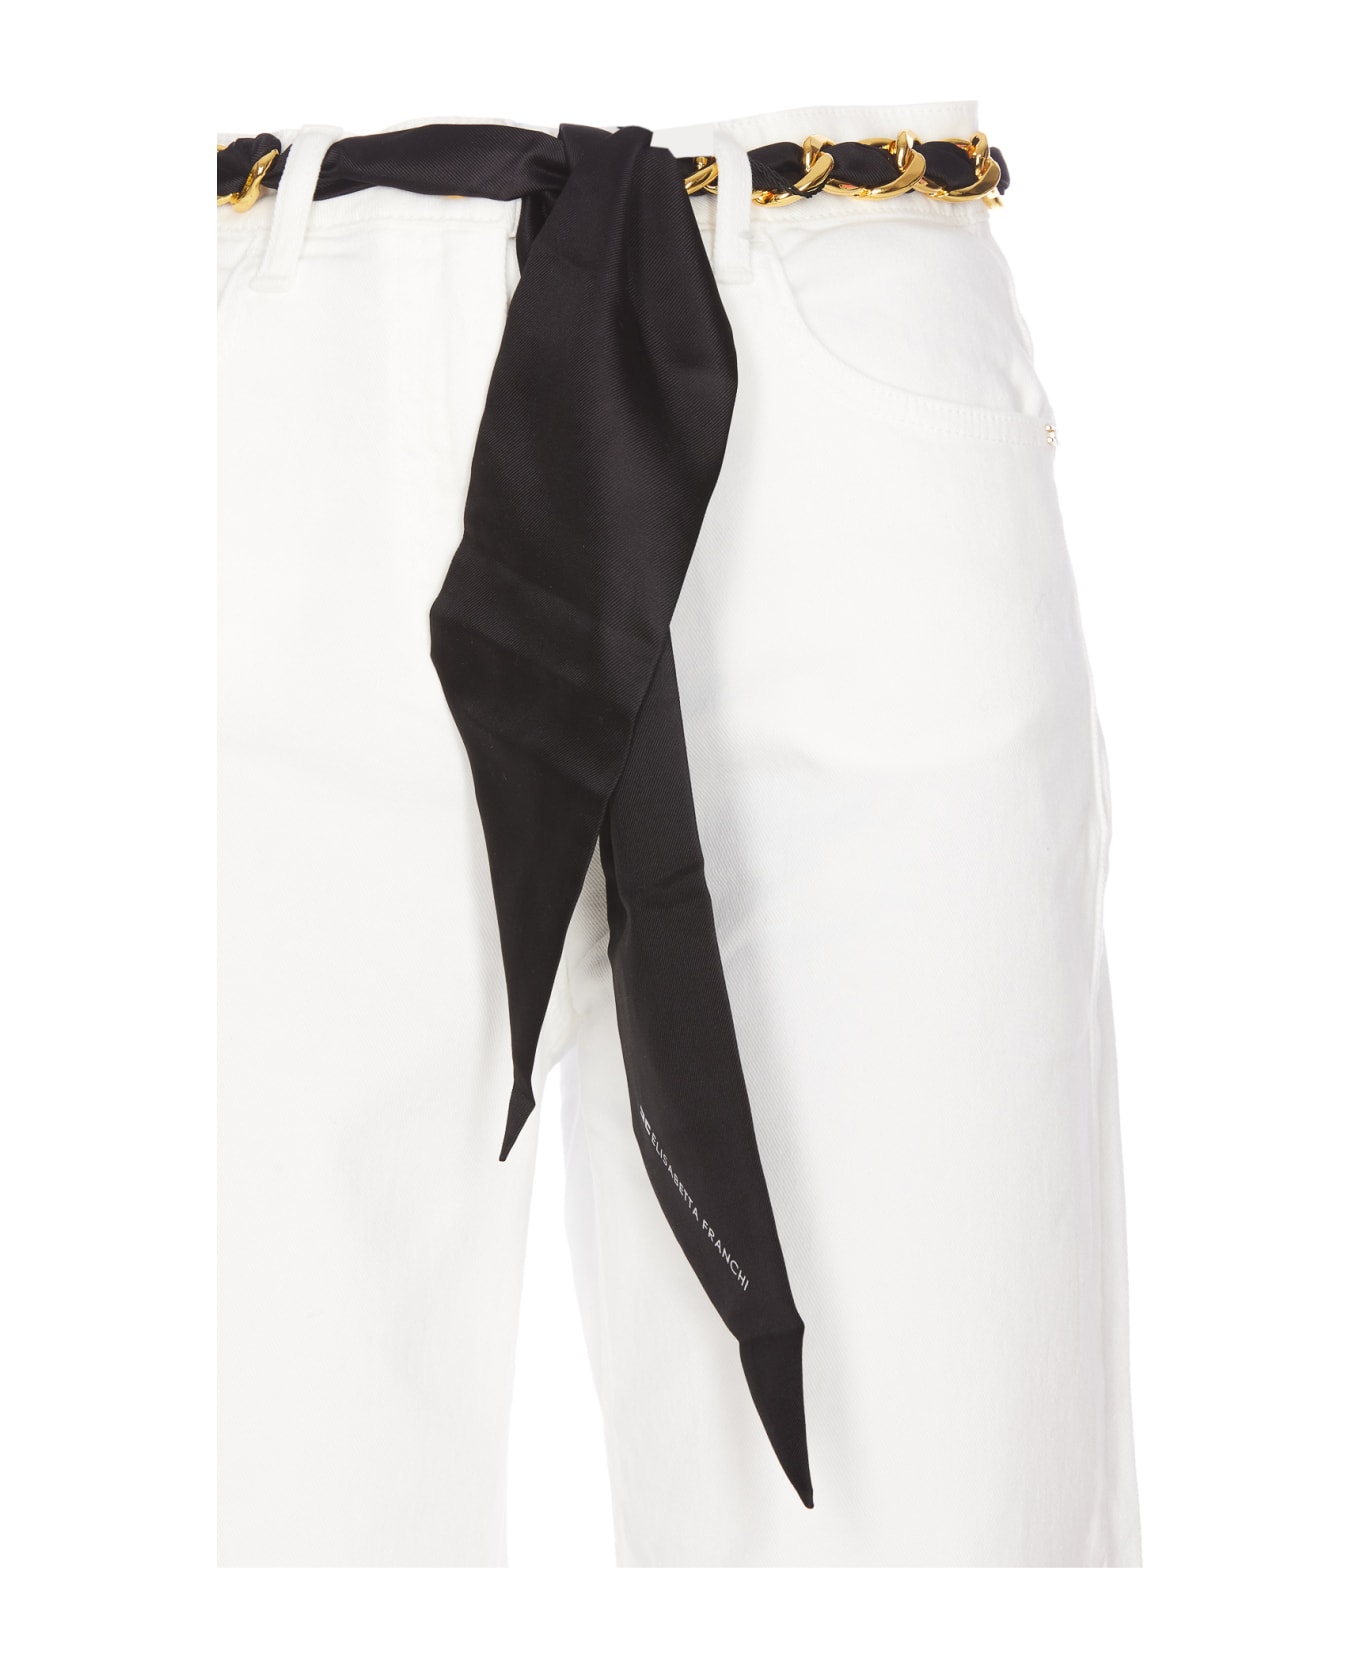 Elisabetta Franchi Cropped Wide Jeans With Chain Belt - Ivory